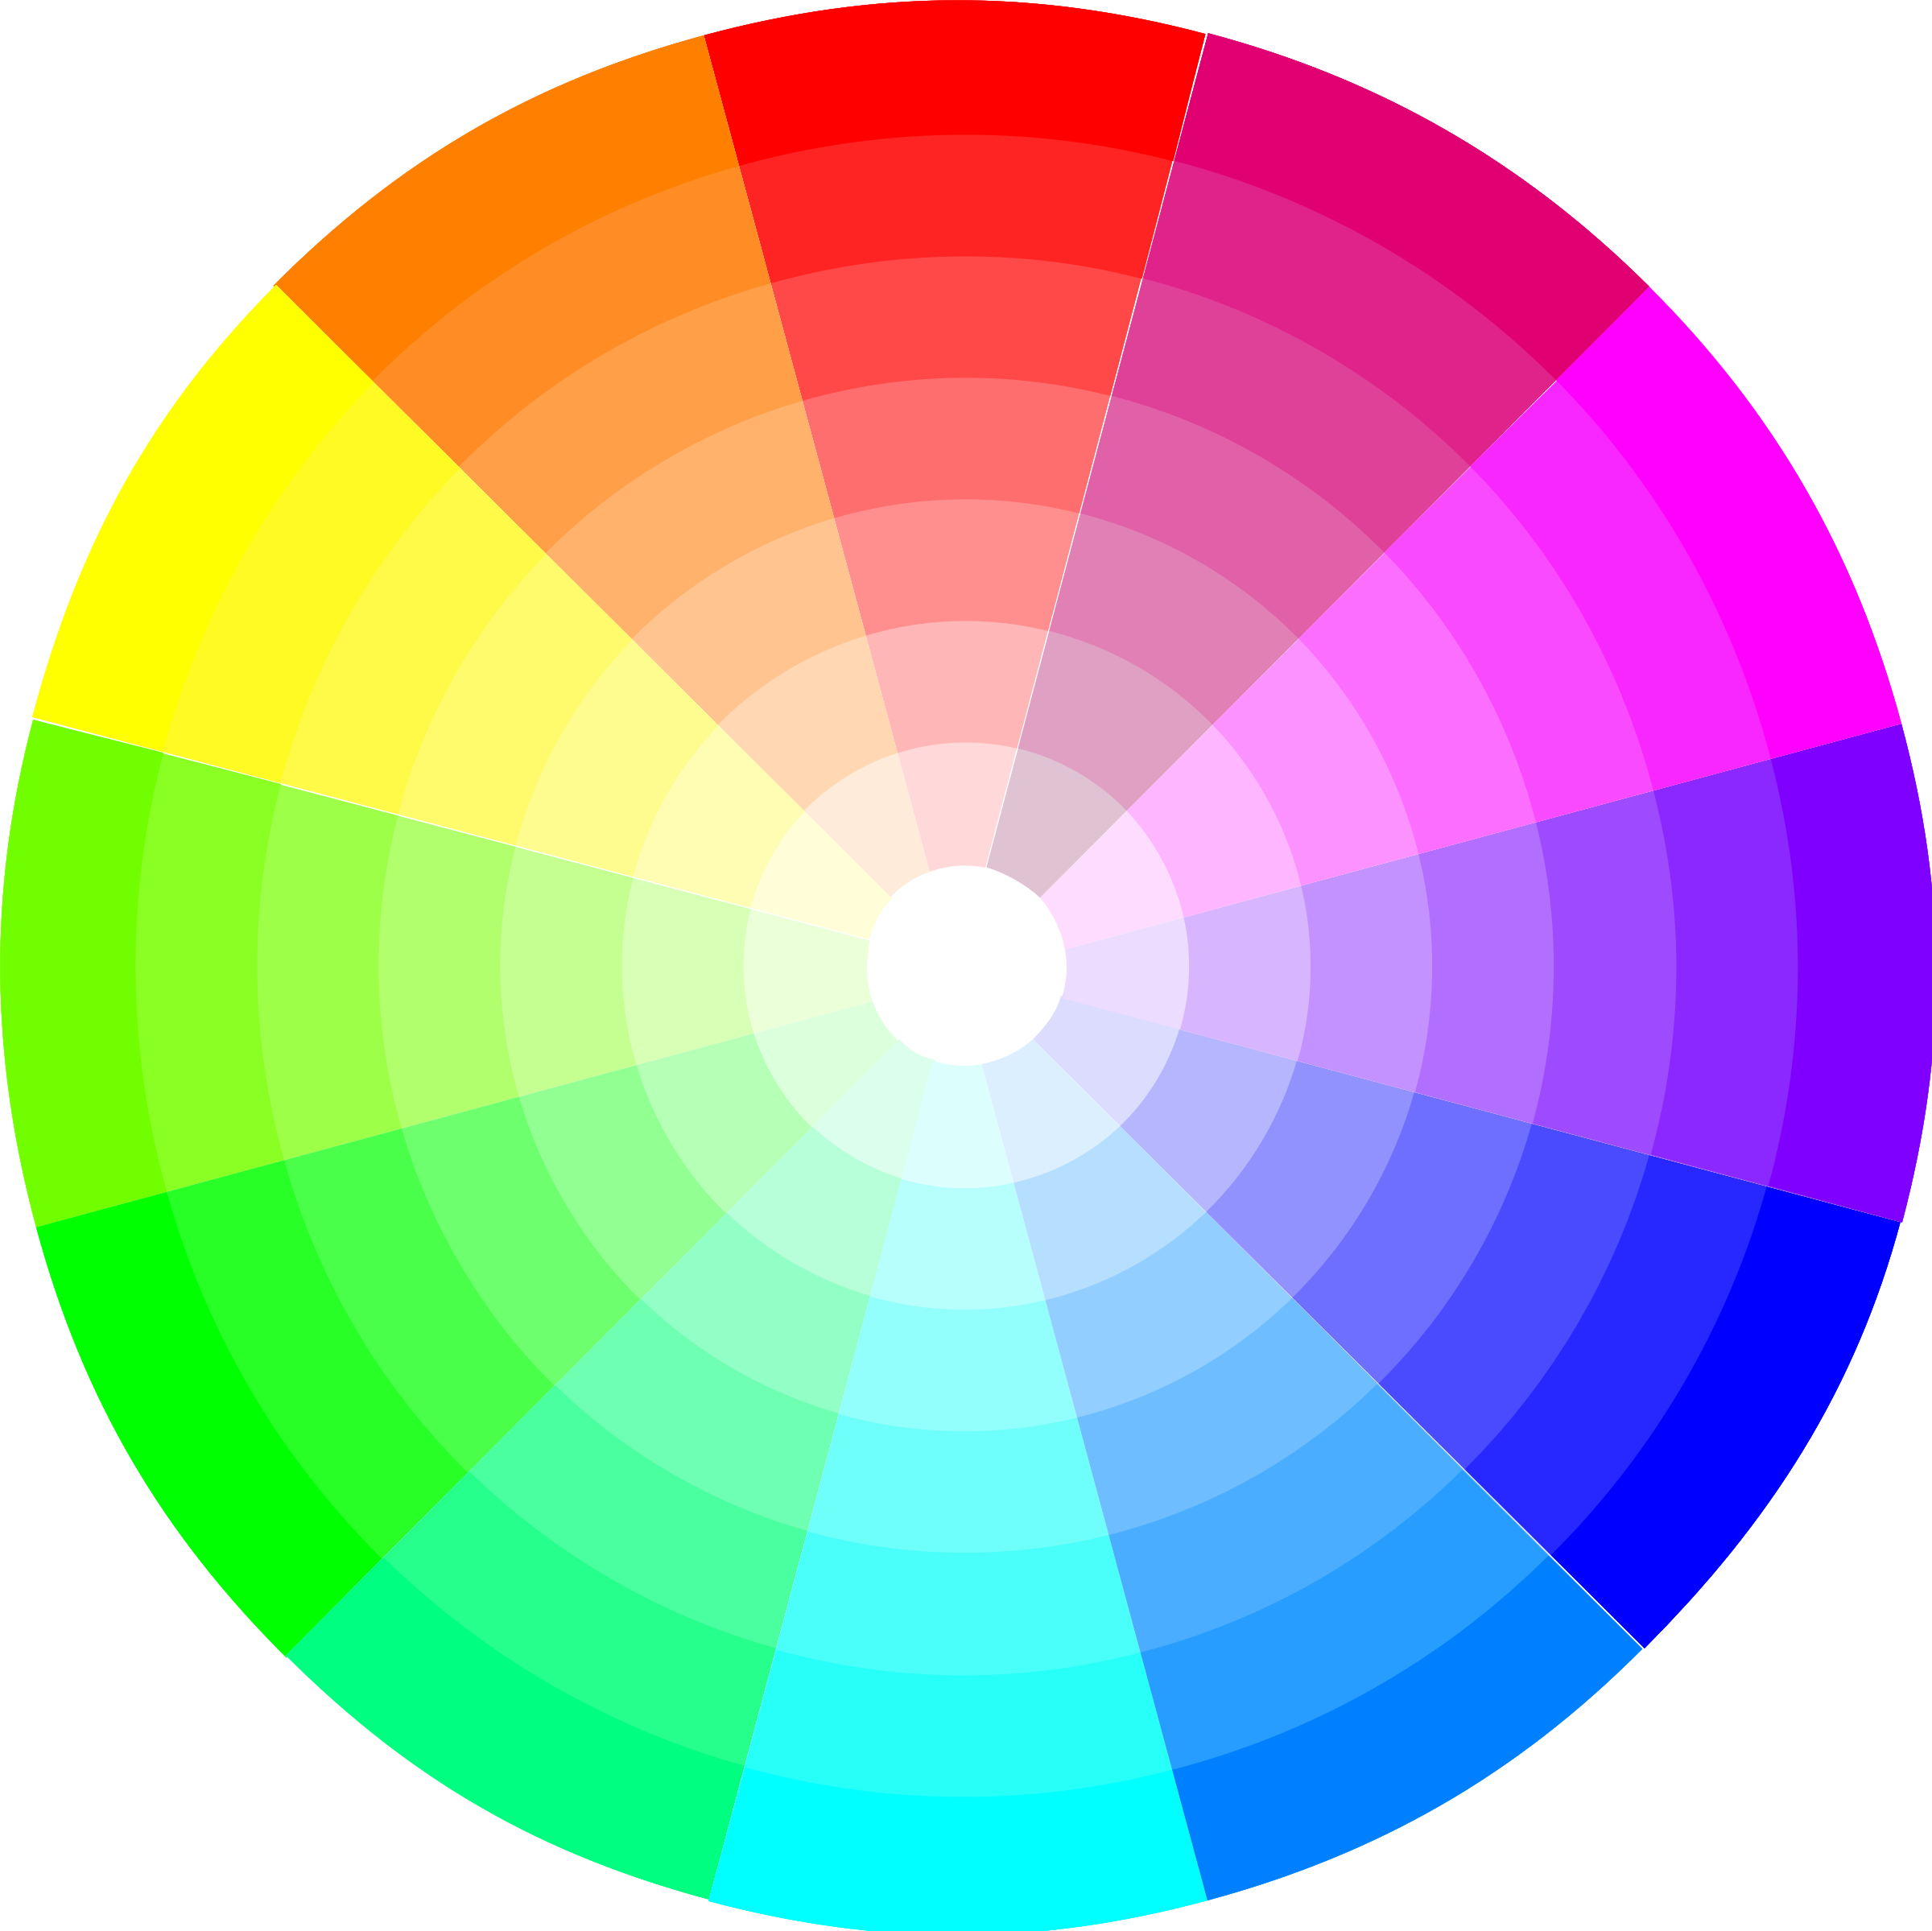 color-wheel-vector-clipart.png?noresize